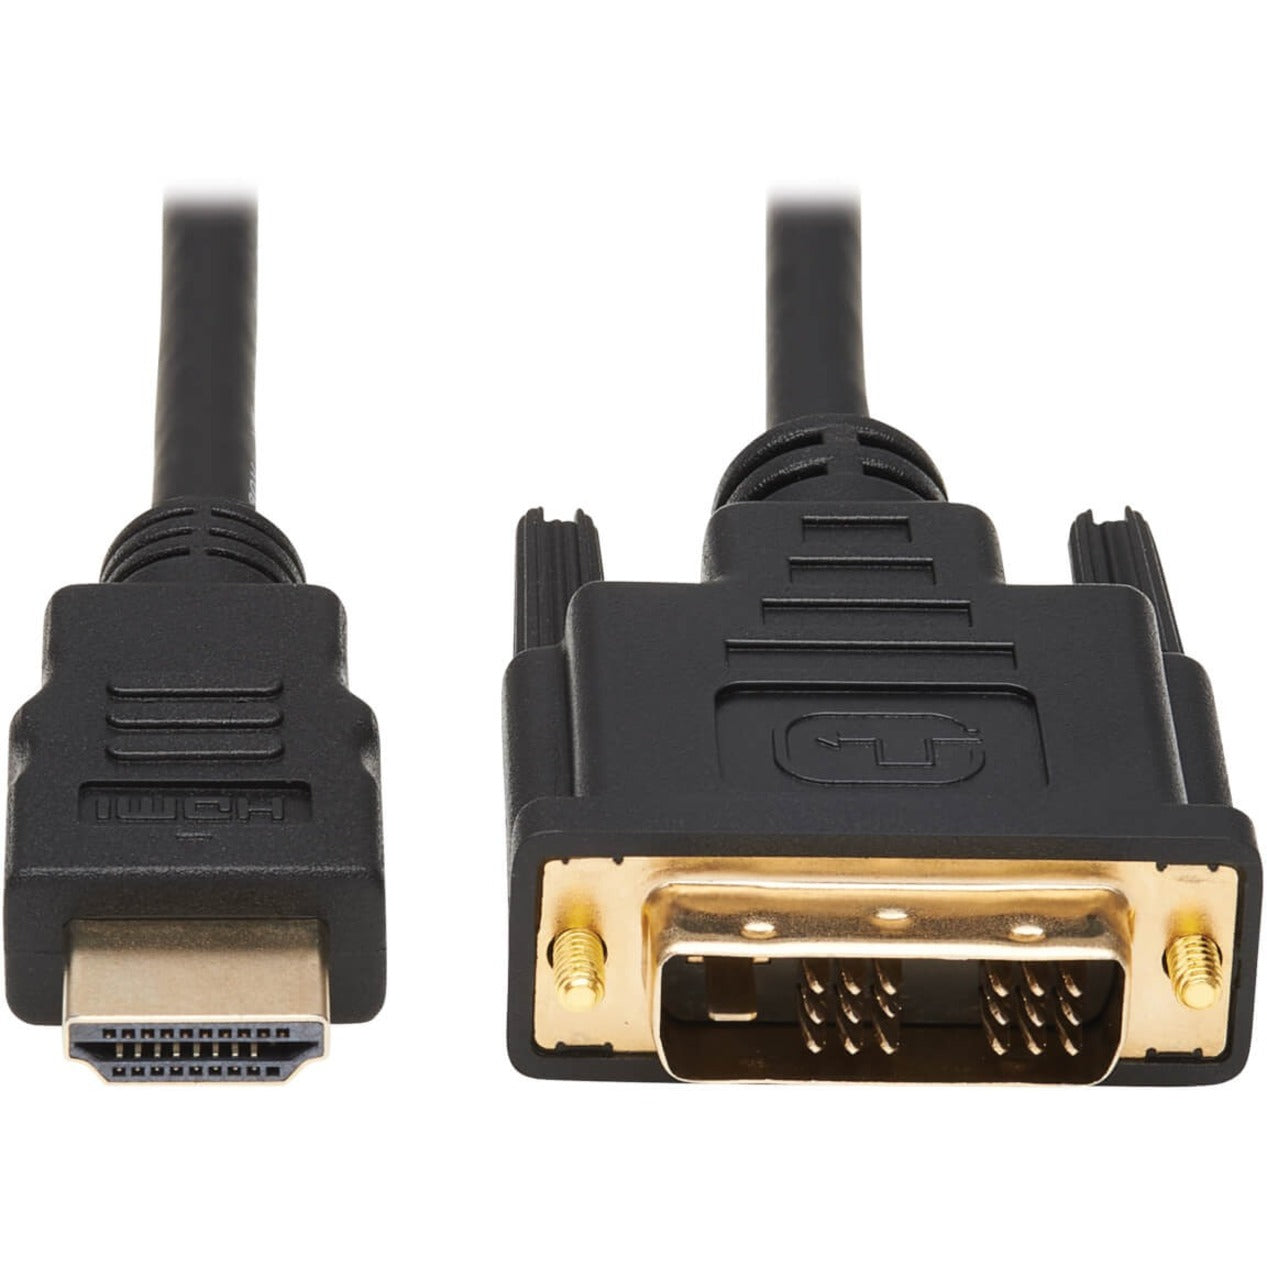 Tripp Lite P566-012 12-ft. HDMI to DVI Gold Digital Video Cable, EMI/RF Protection, 5 Gbit/s Data Transfer Rate, 1920 x 1080 Supported Resolution, Black